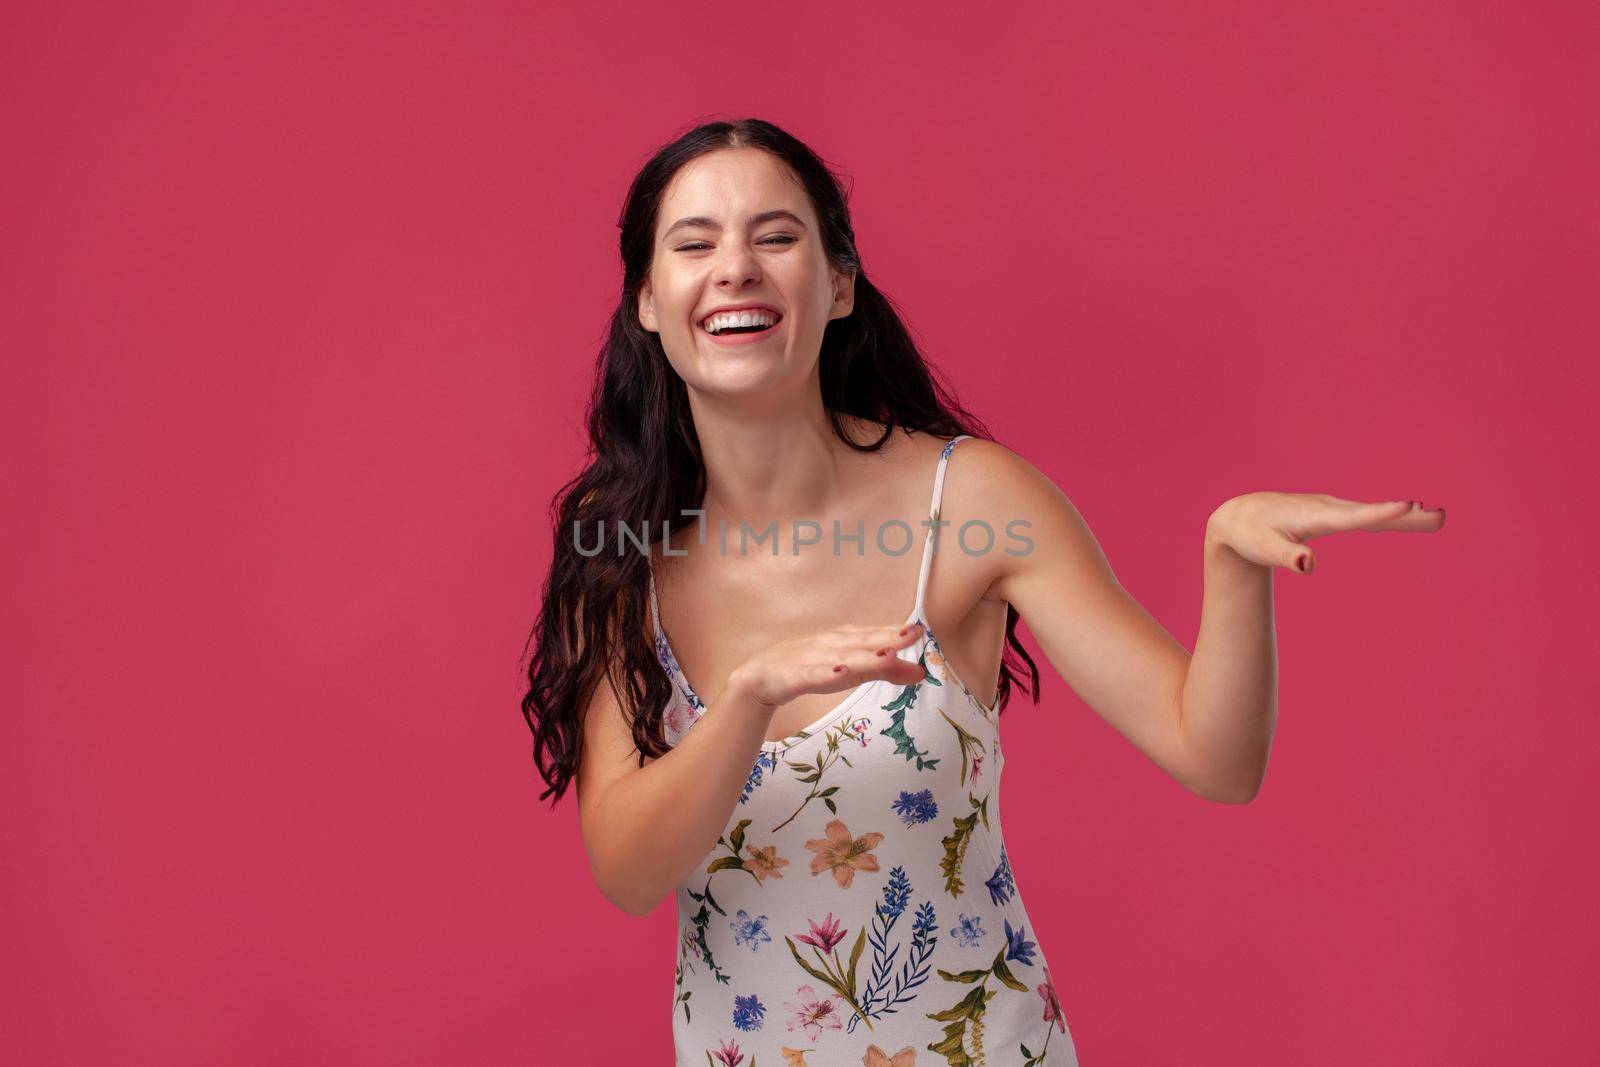 Portrait of a pretty woman in a white dress with floral print standing on a pink wall background in studio. She is laughing and looking happy. People sincere emotions, lifestyle concept. Mockup copy space.